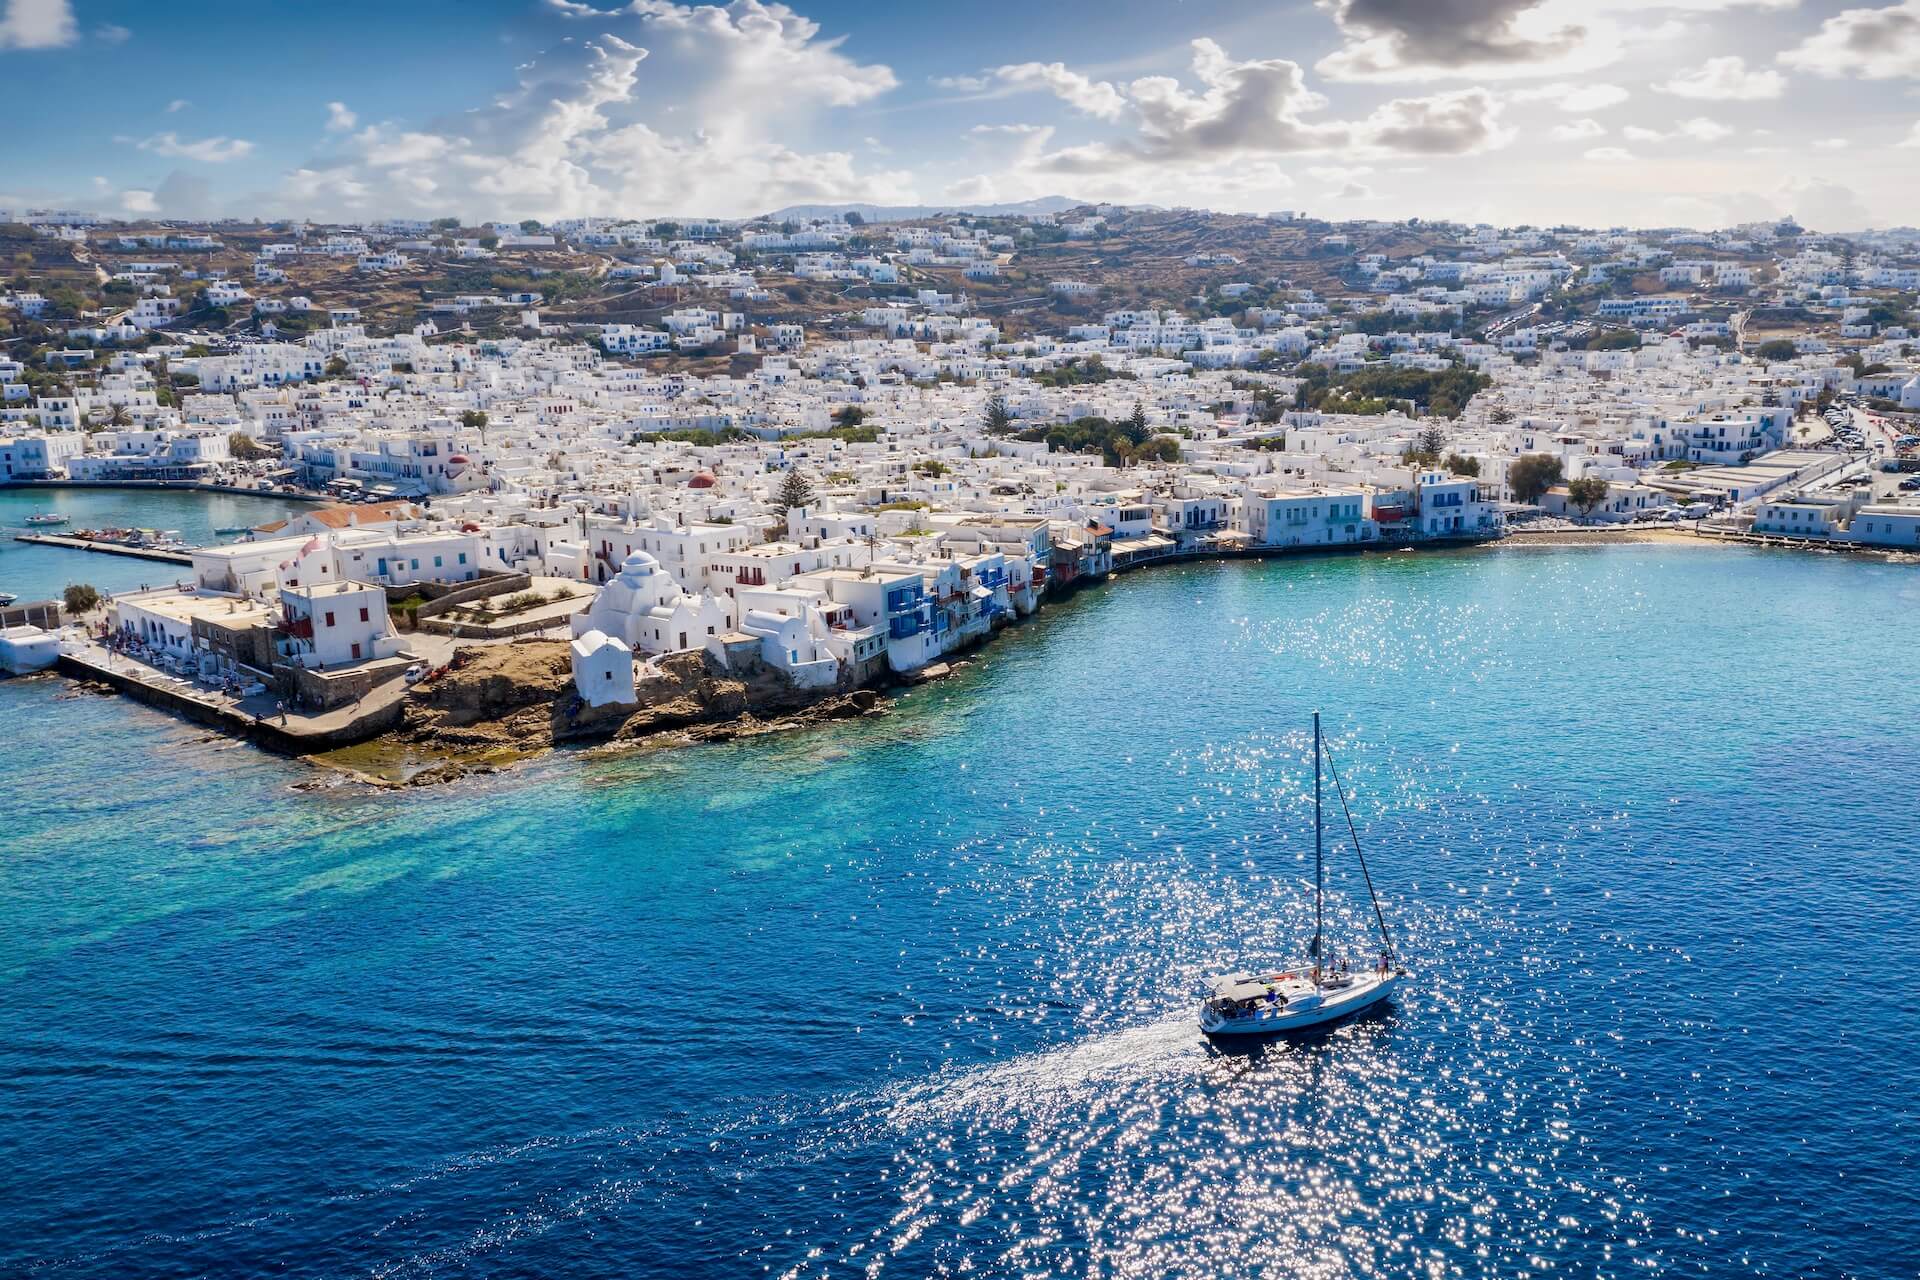 Aerial view of the Mykonos island